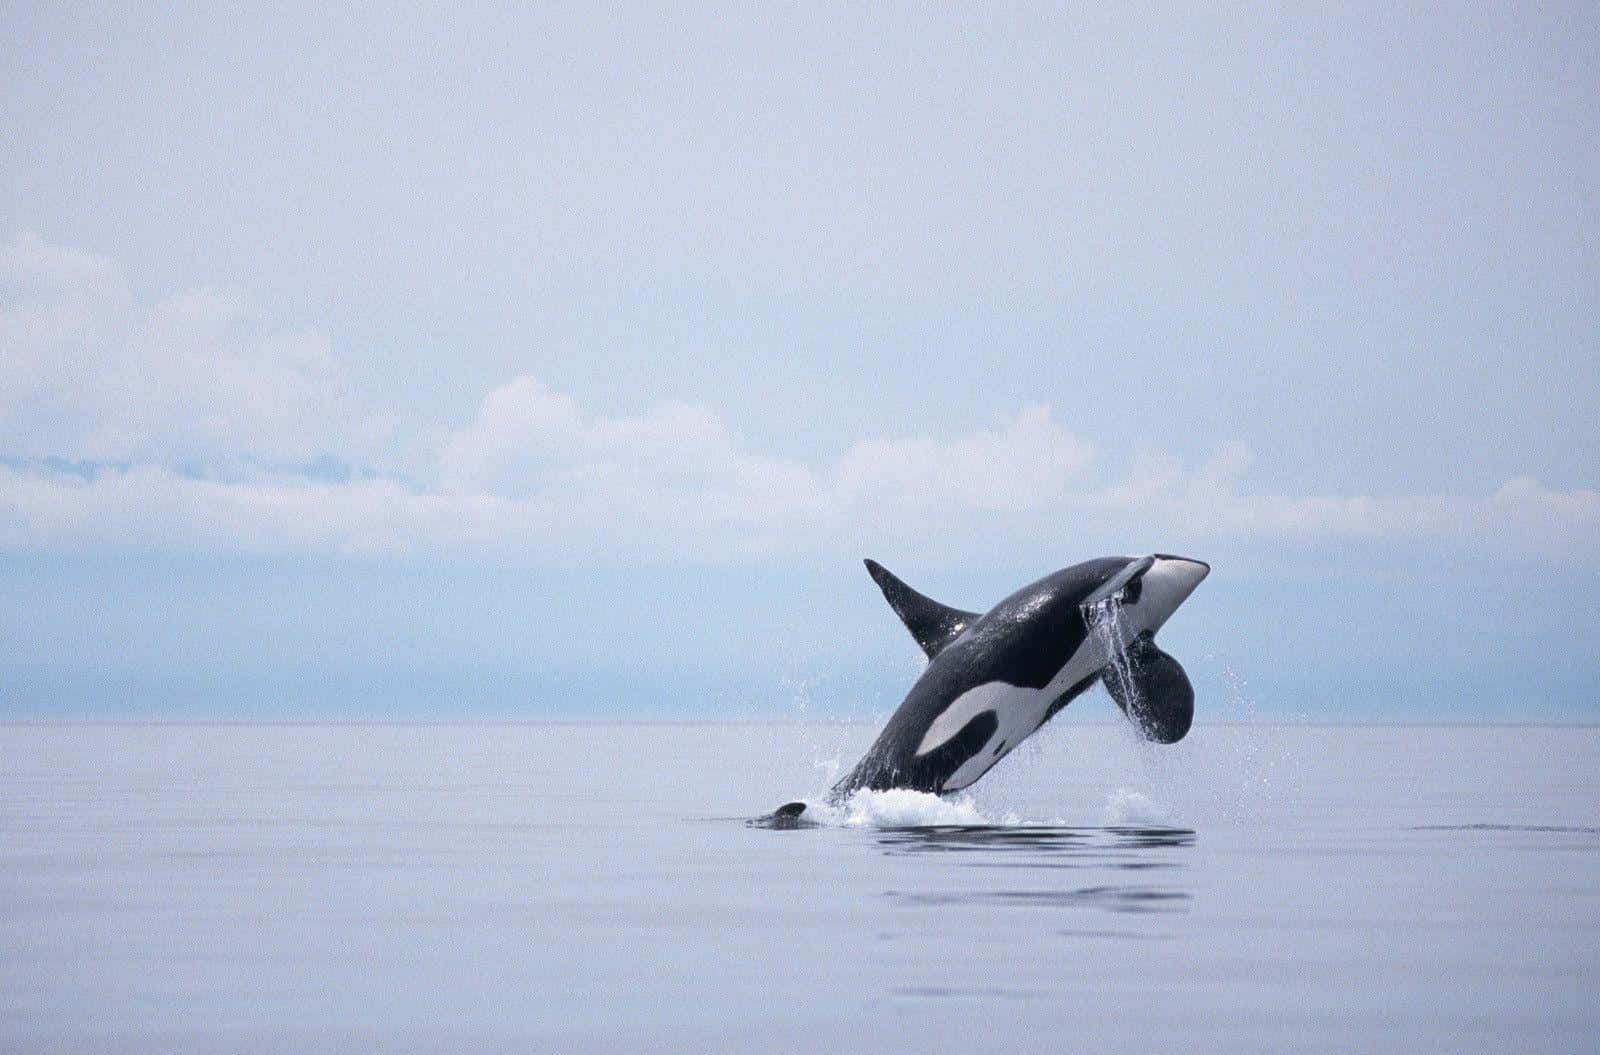 Orca Killer Whale Jumping In Ocean Picture